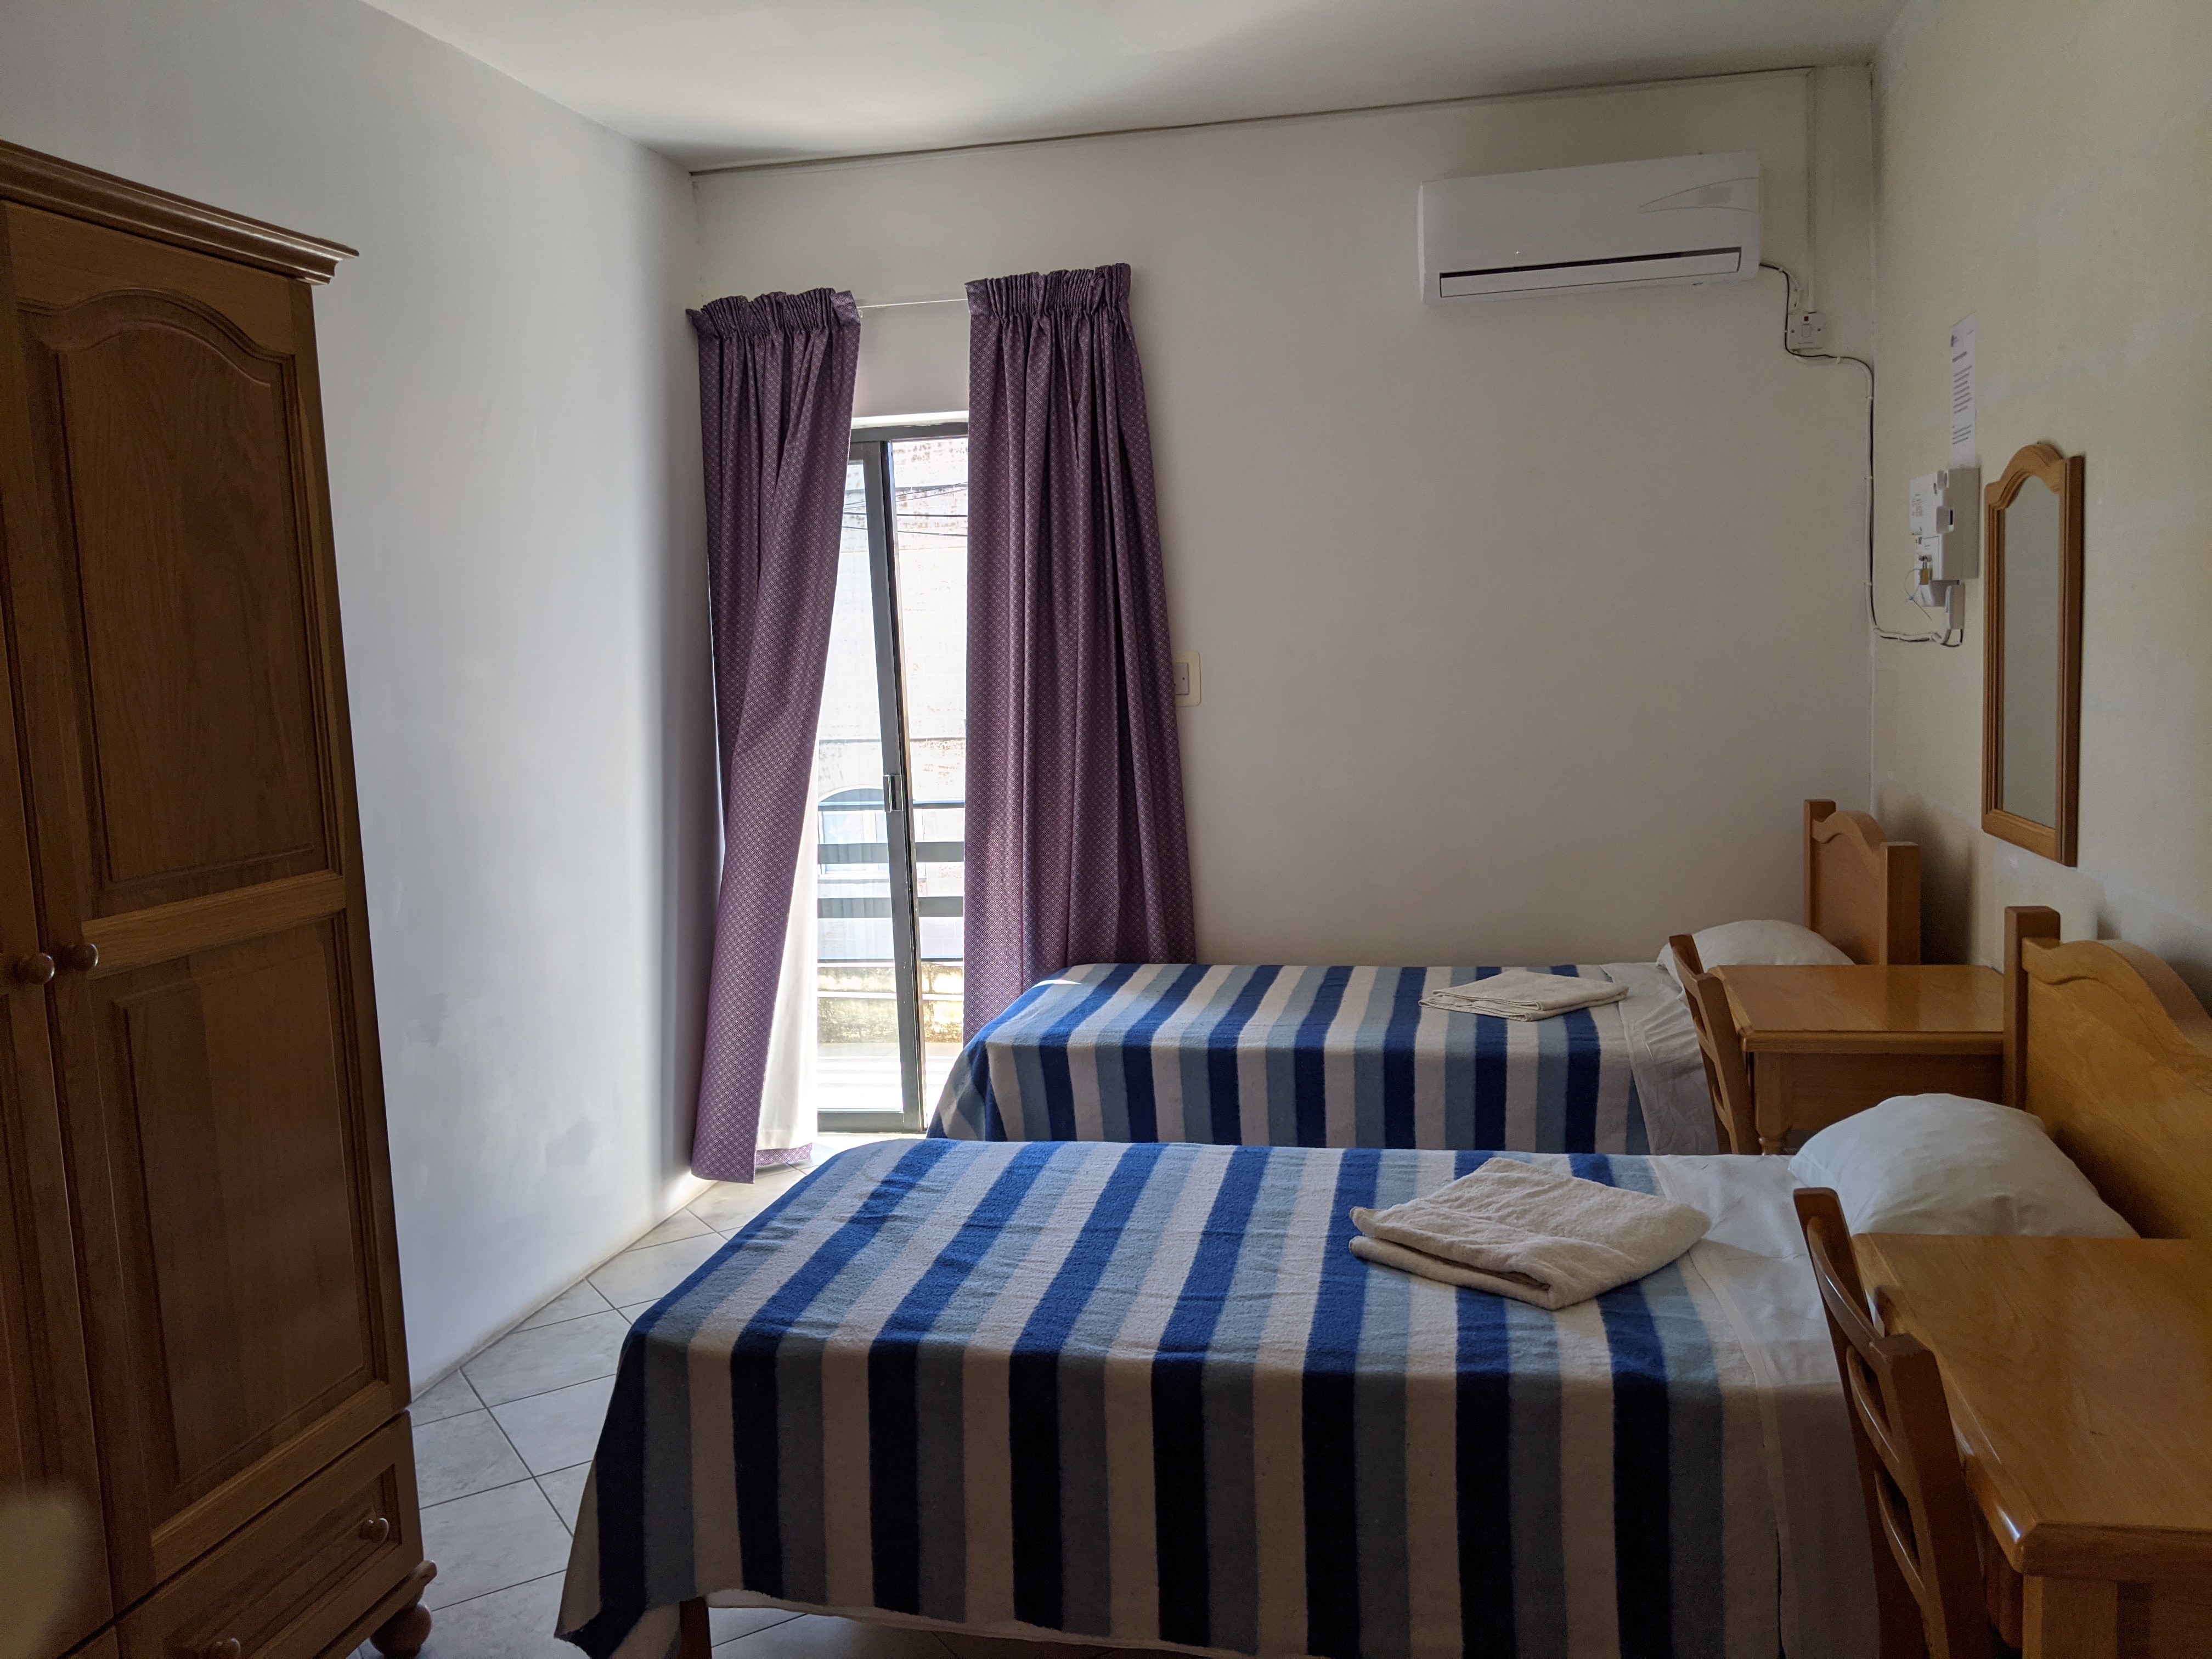 Study English in Malta - GSE Residence bedrooms next to school triple room with balcony